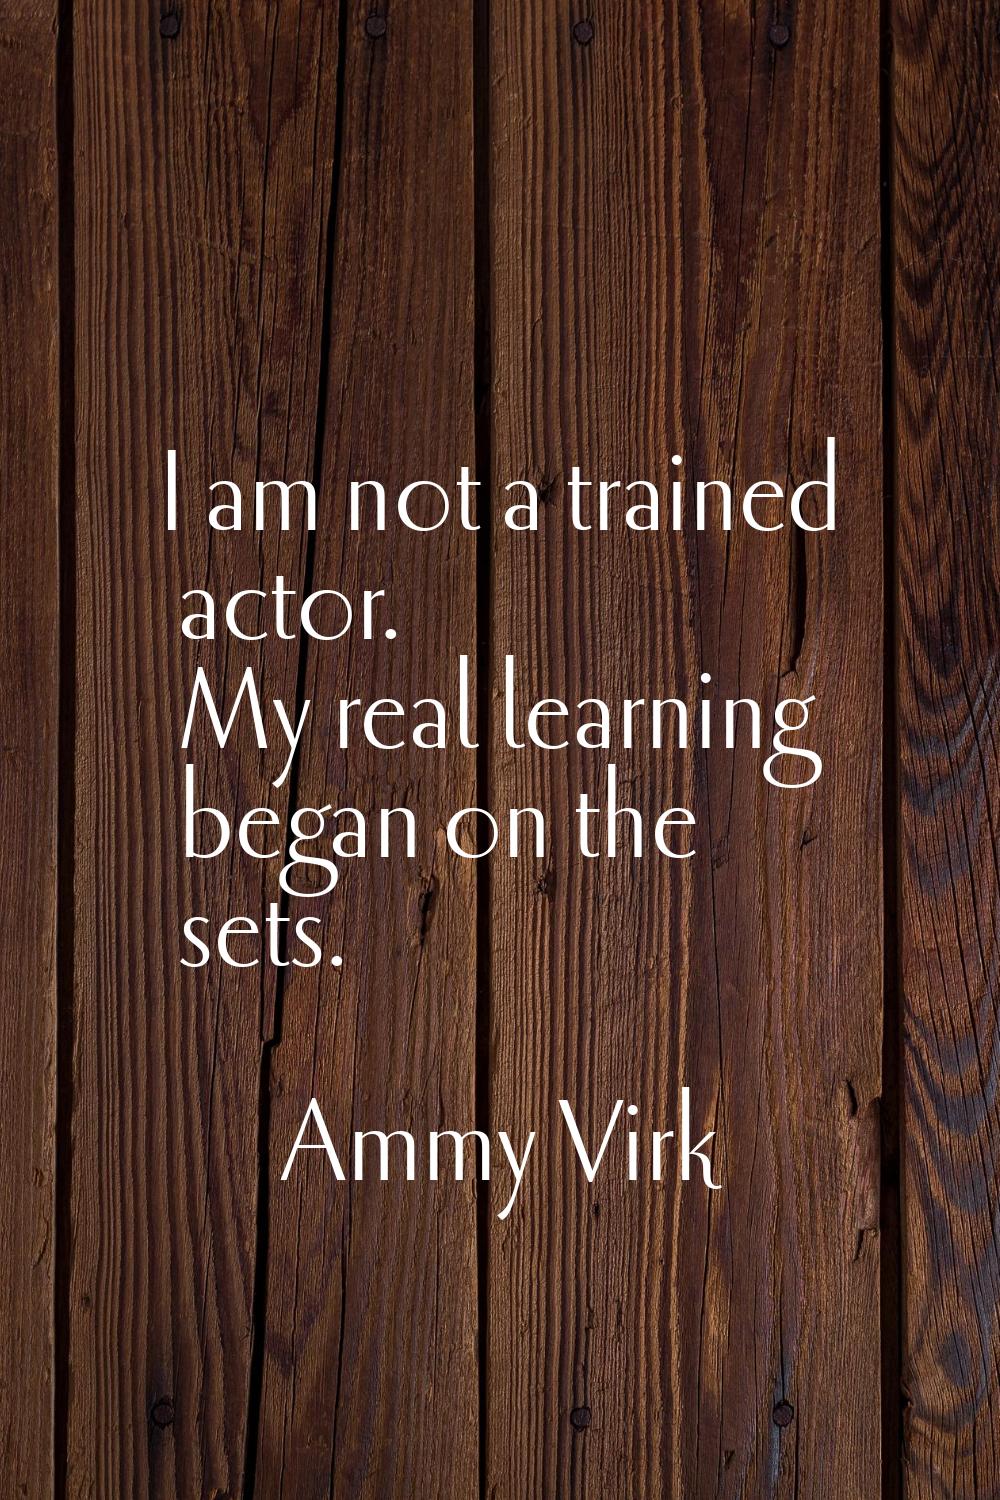 I am not a trained actor. My real learning began on the sets.